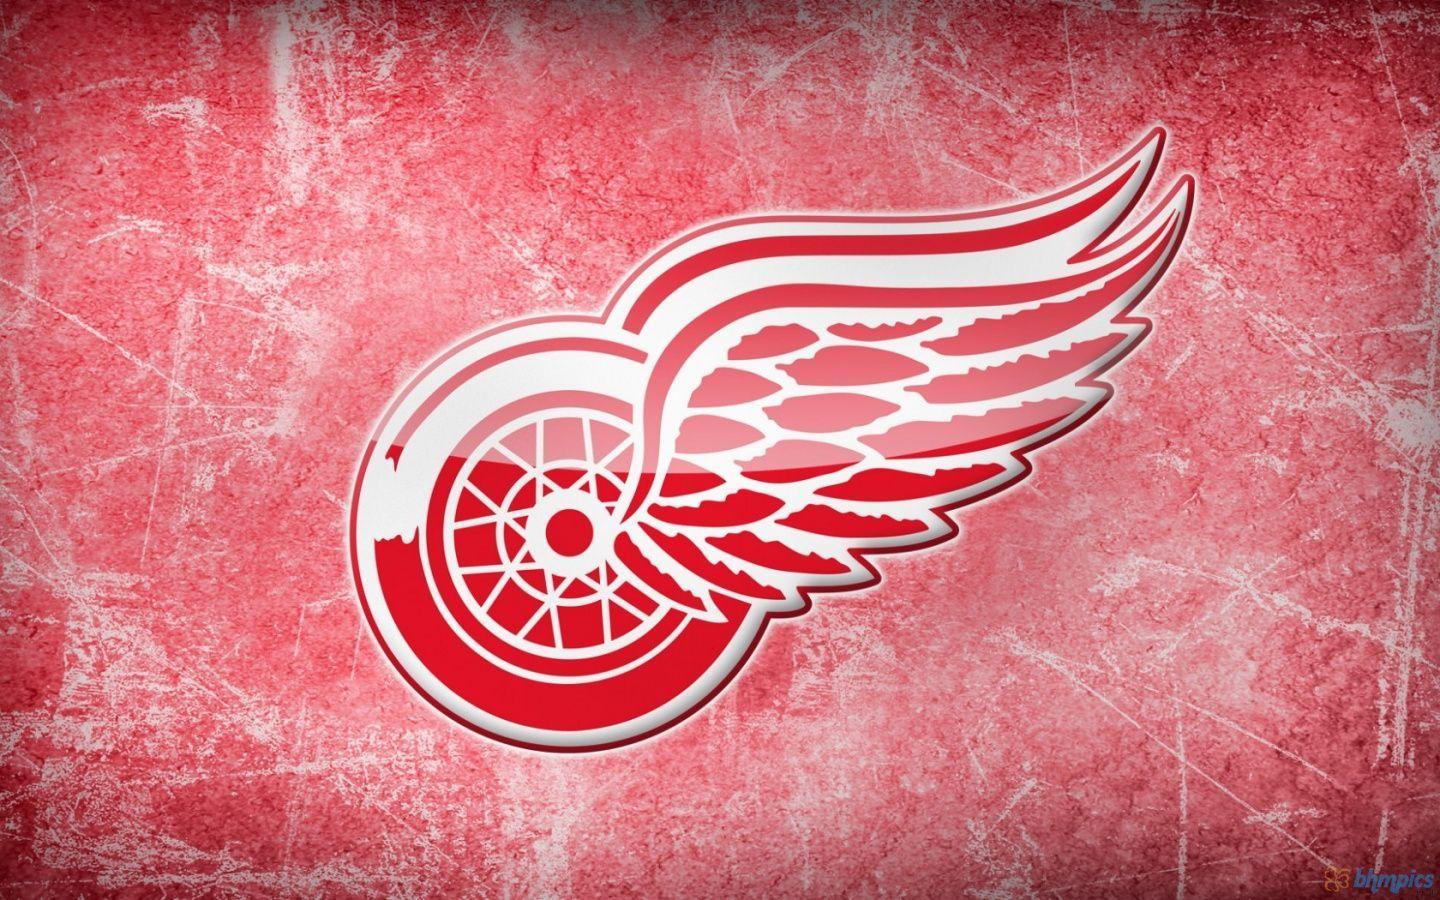 View source image. RED WINGS. Red wing and Detroit